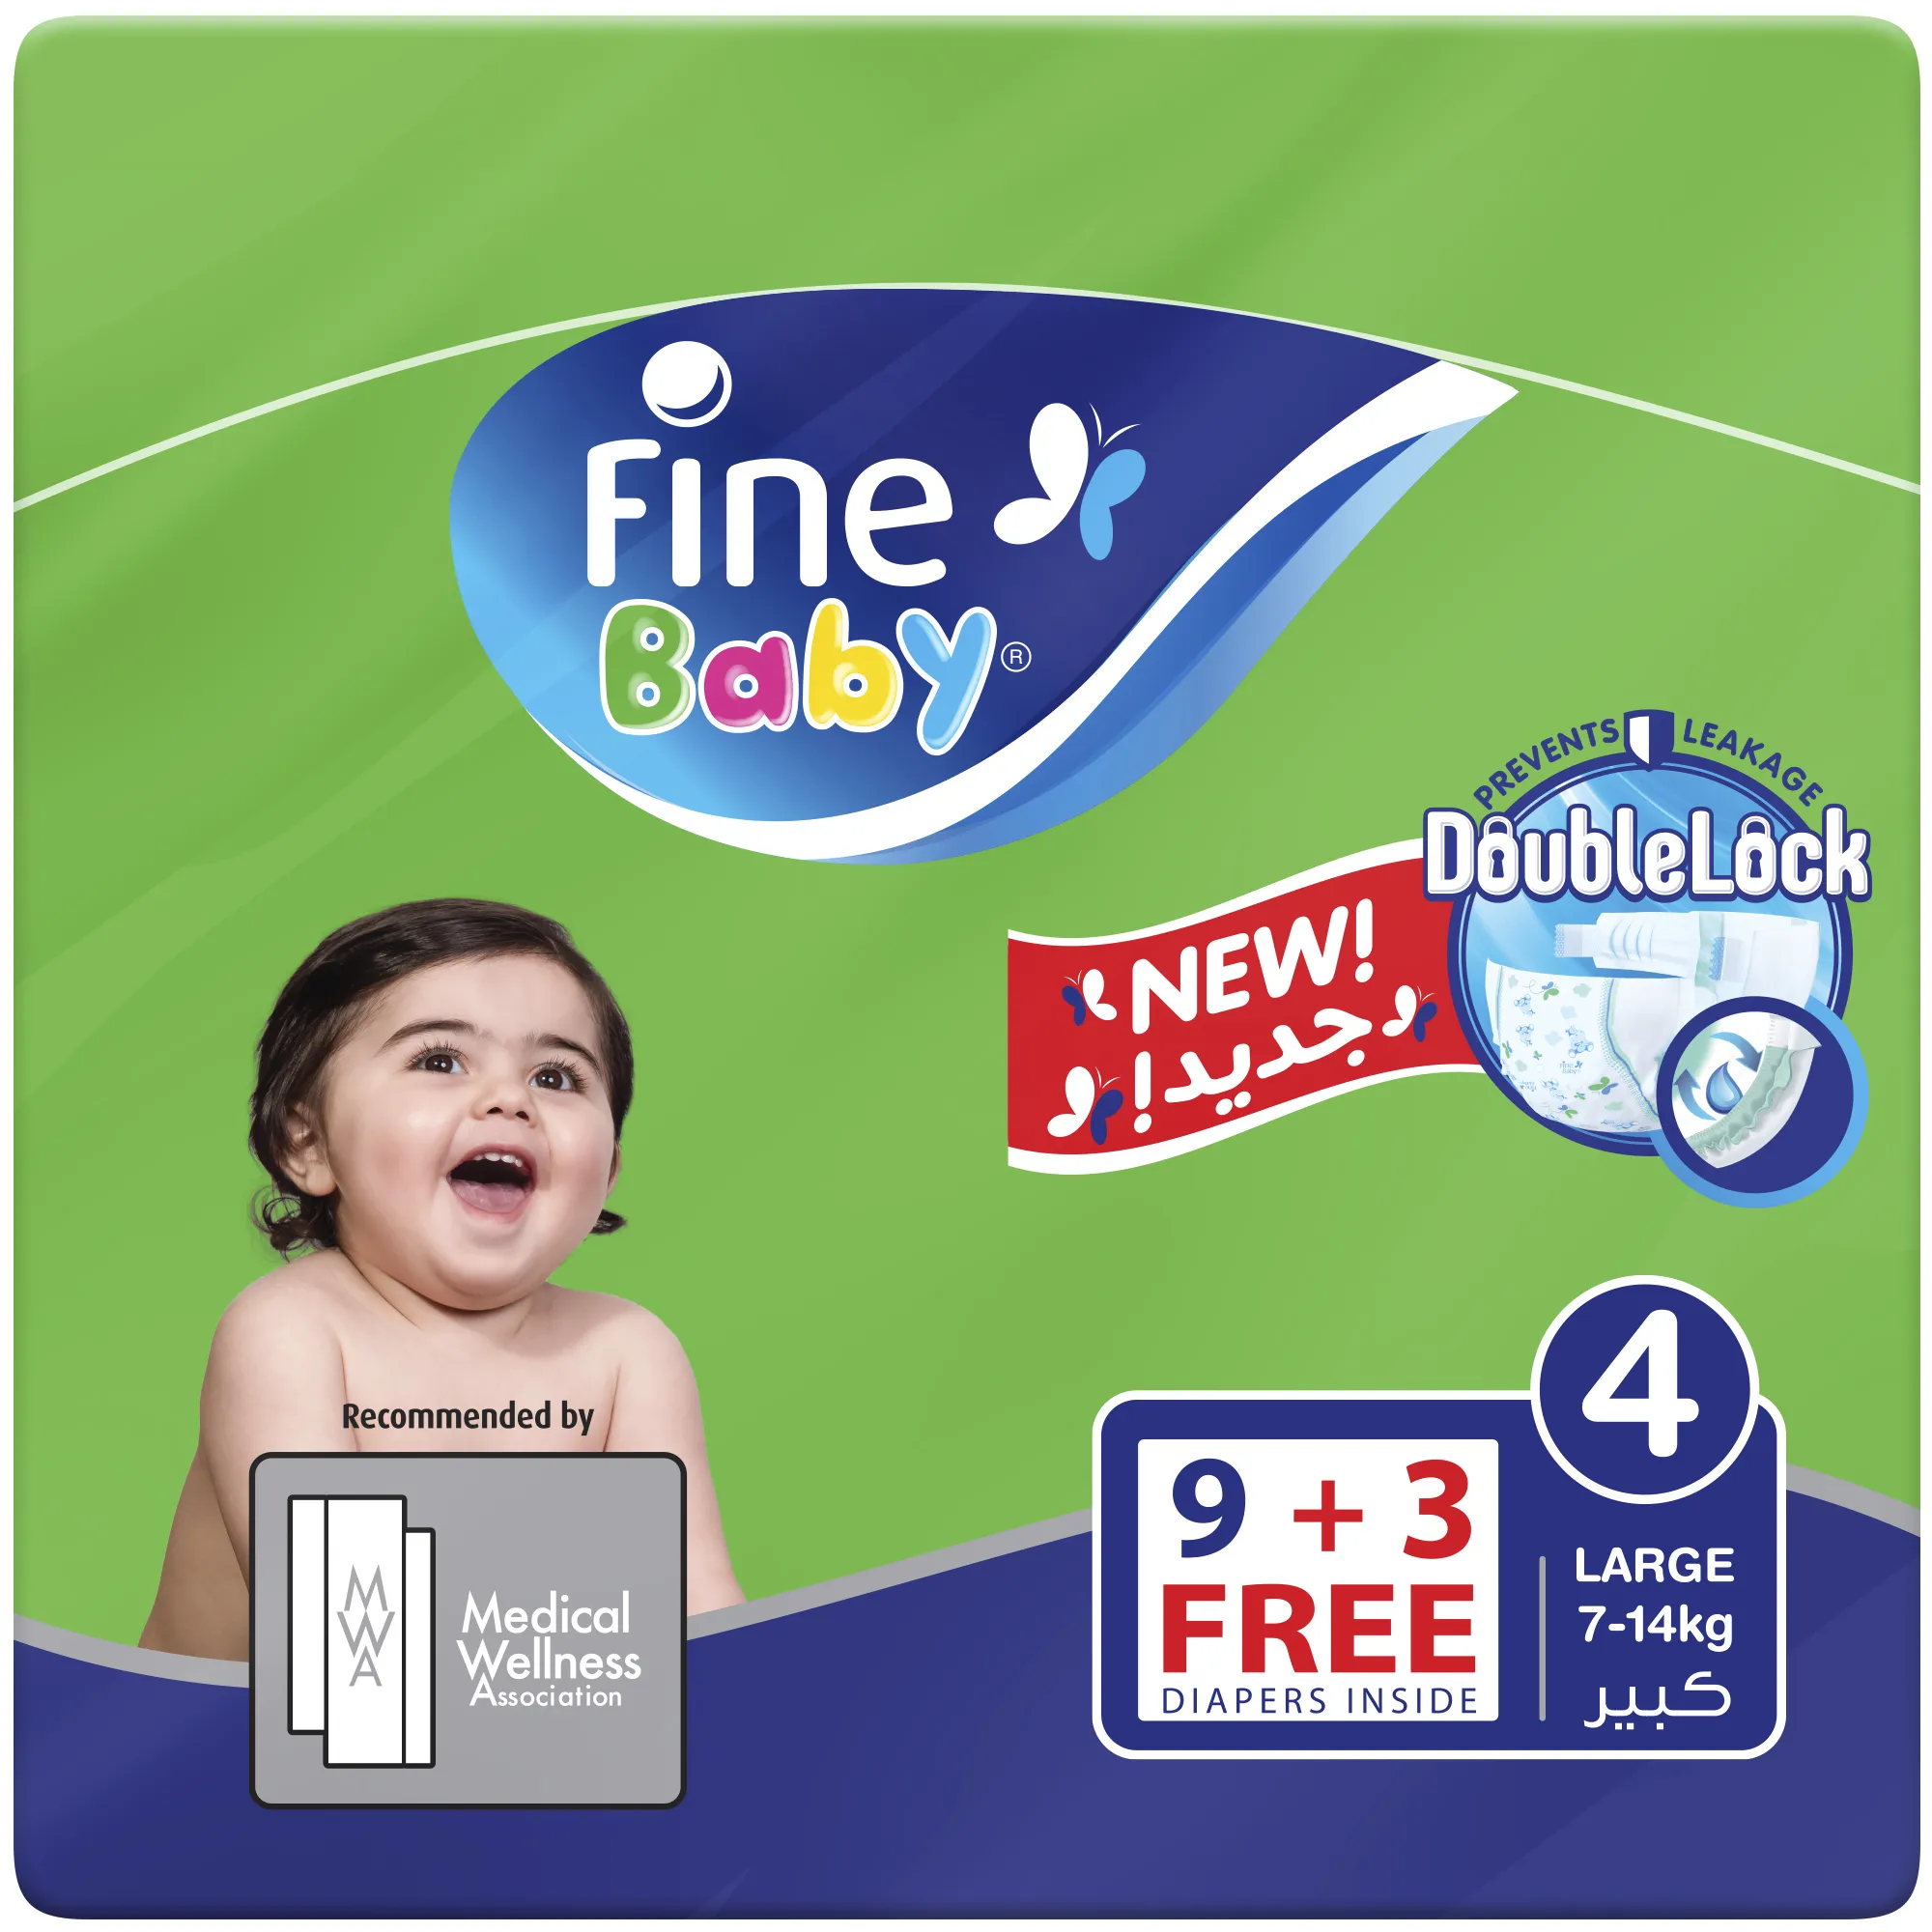 Fine Baby Diapers, DoubleLock Technology, Size 4, Large 7-14kg, Travel Pack, 12 Diapers